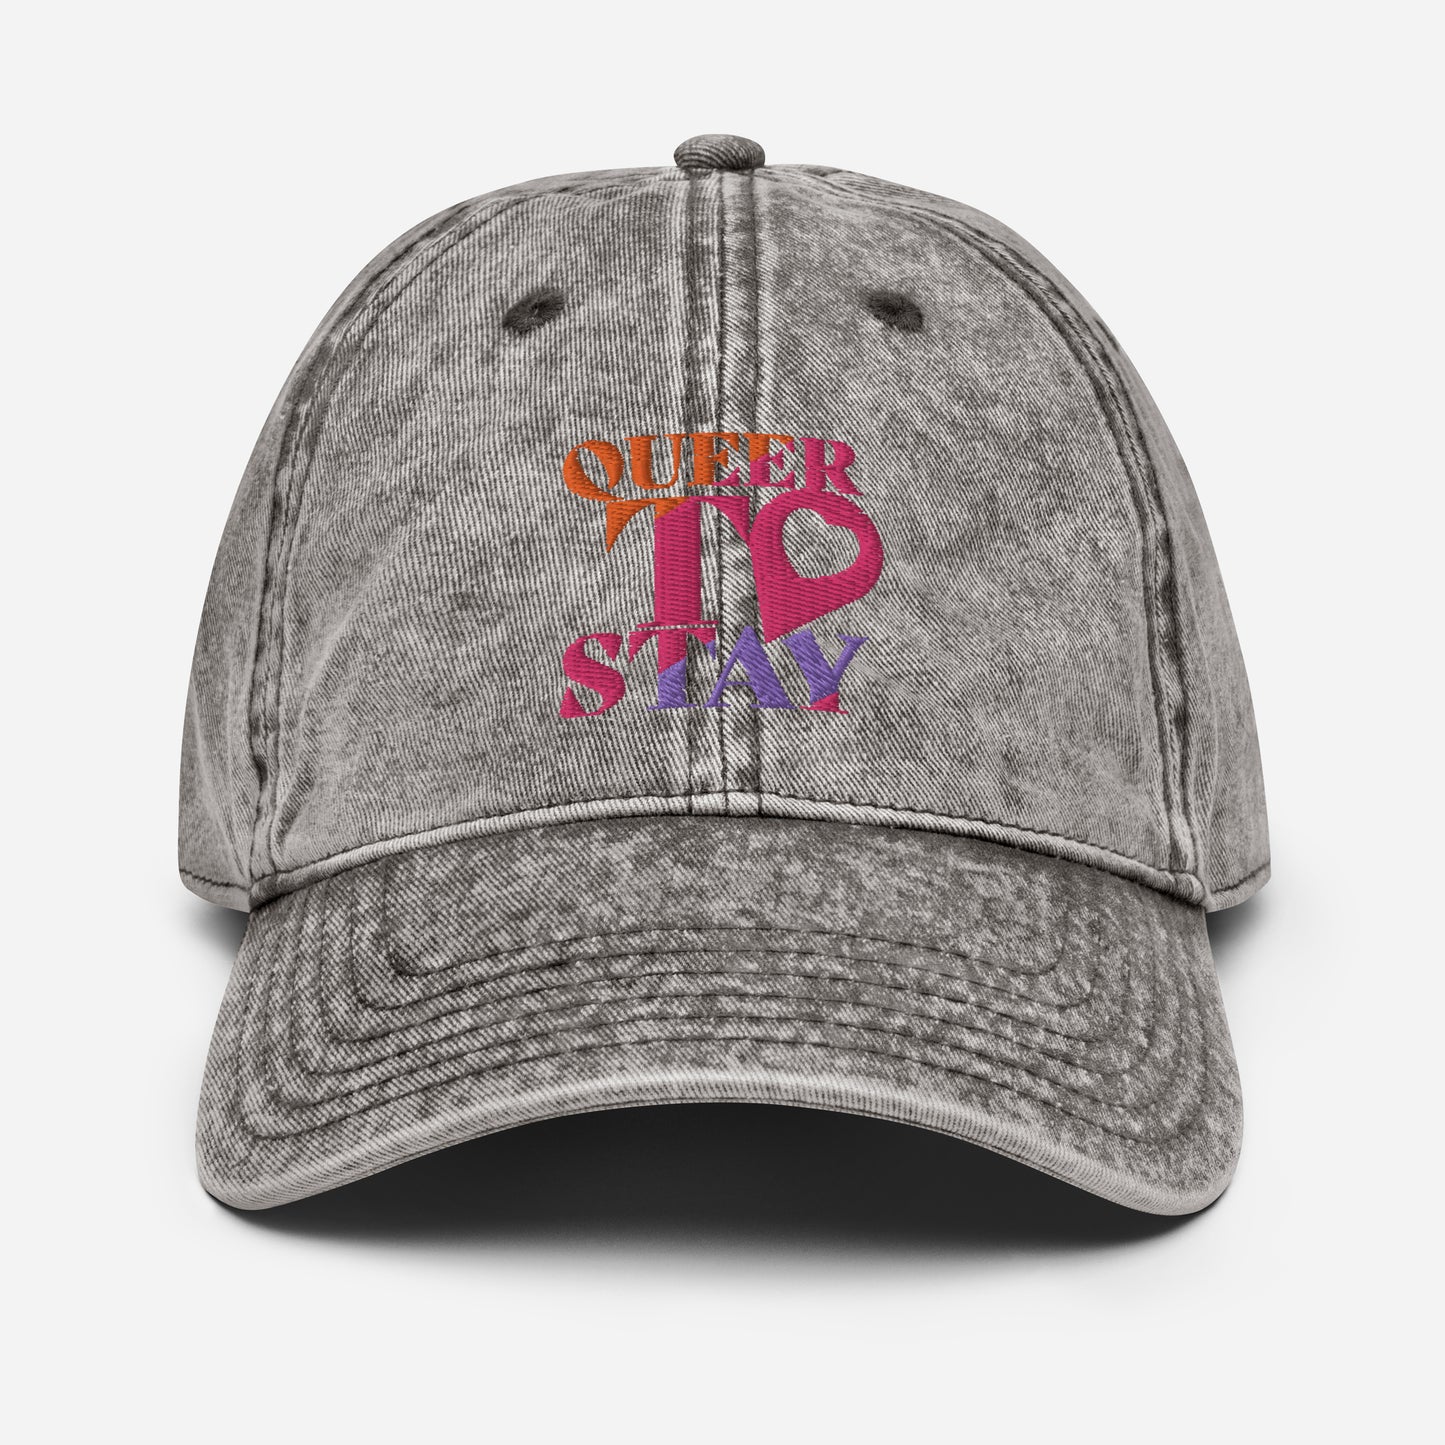 Showtime Queer To Stay Vintage Cap